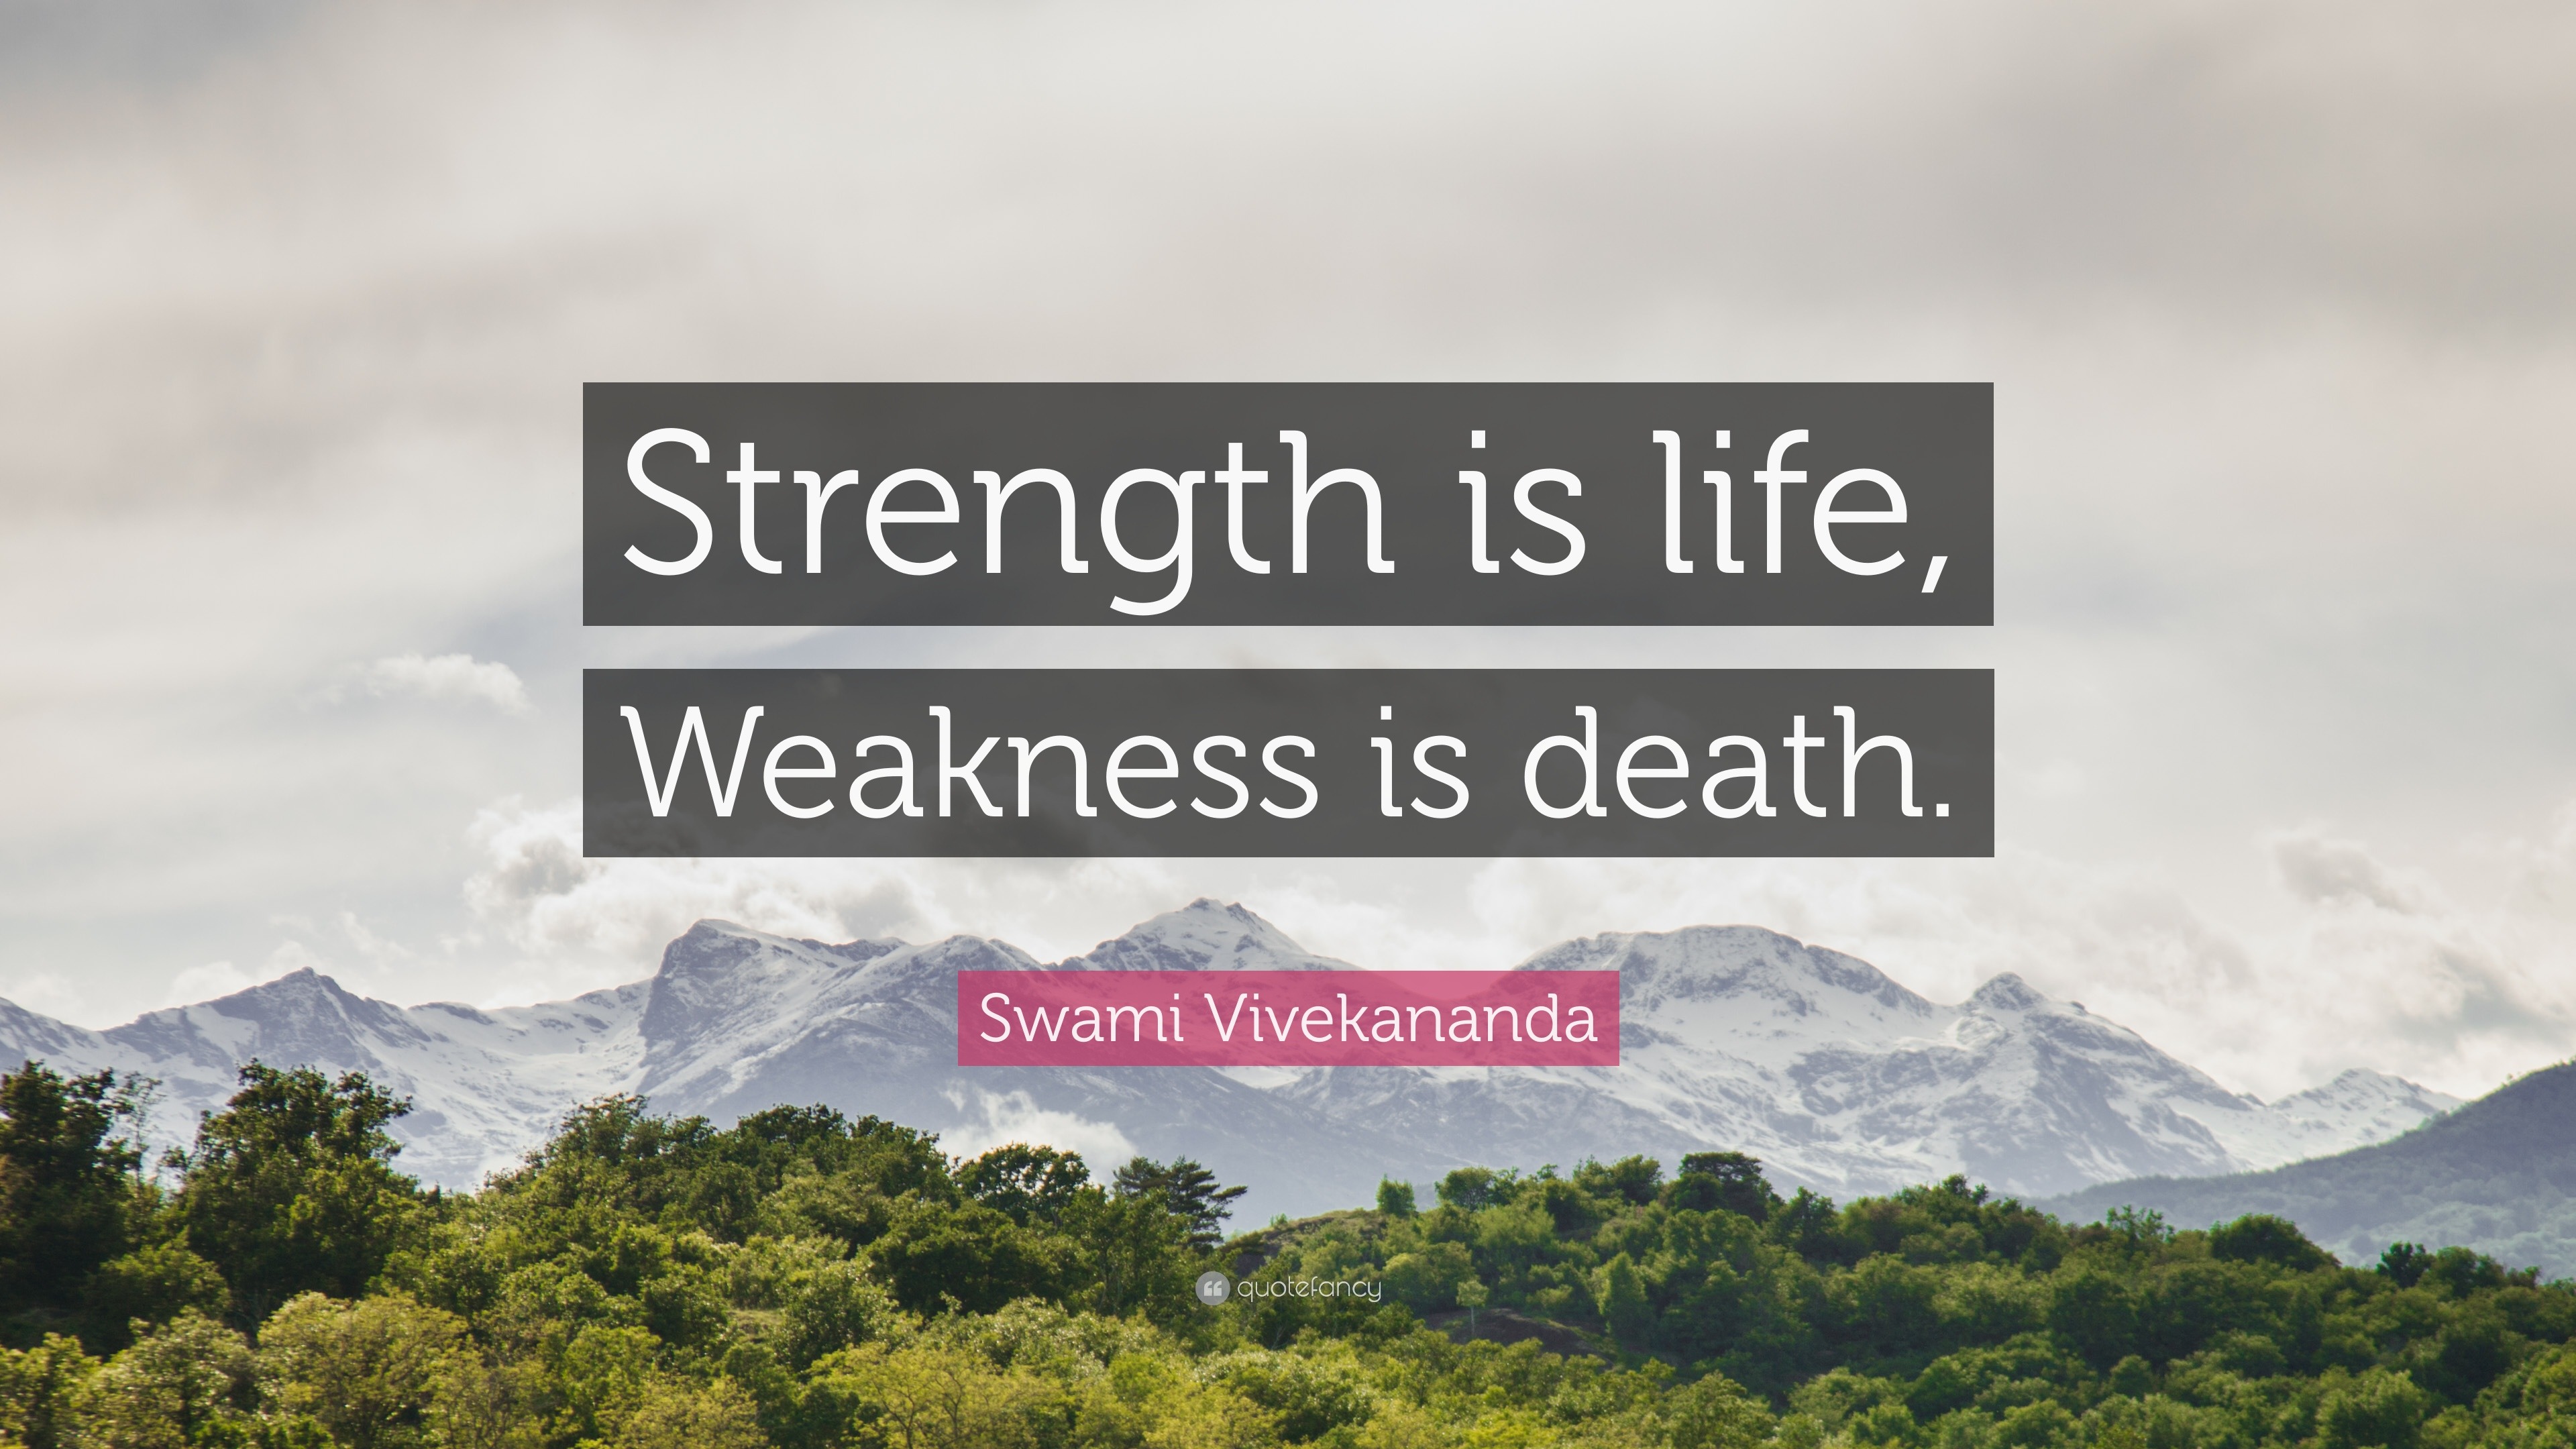 Swami Vivekananda Quote “Strength is life Weakness is ”